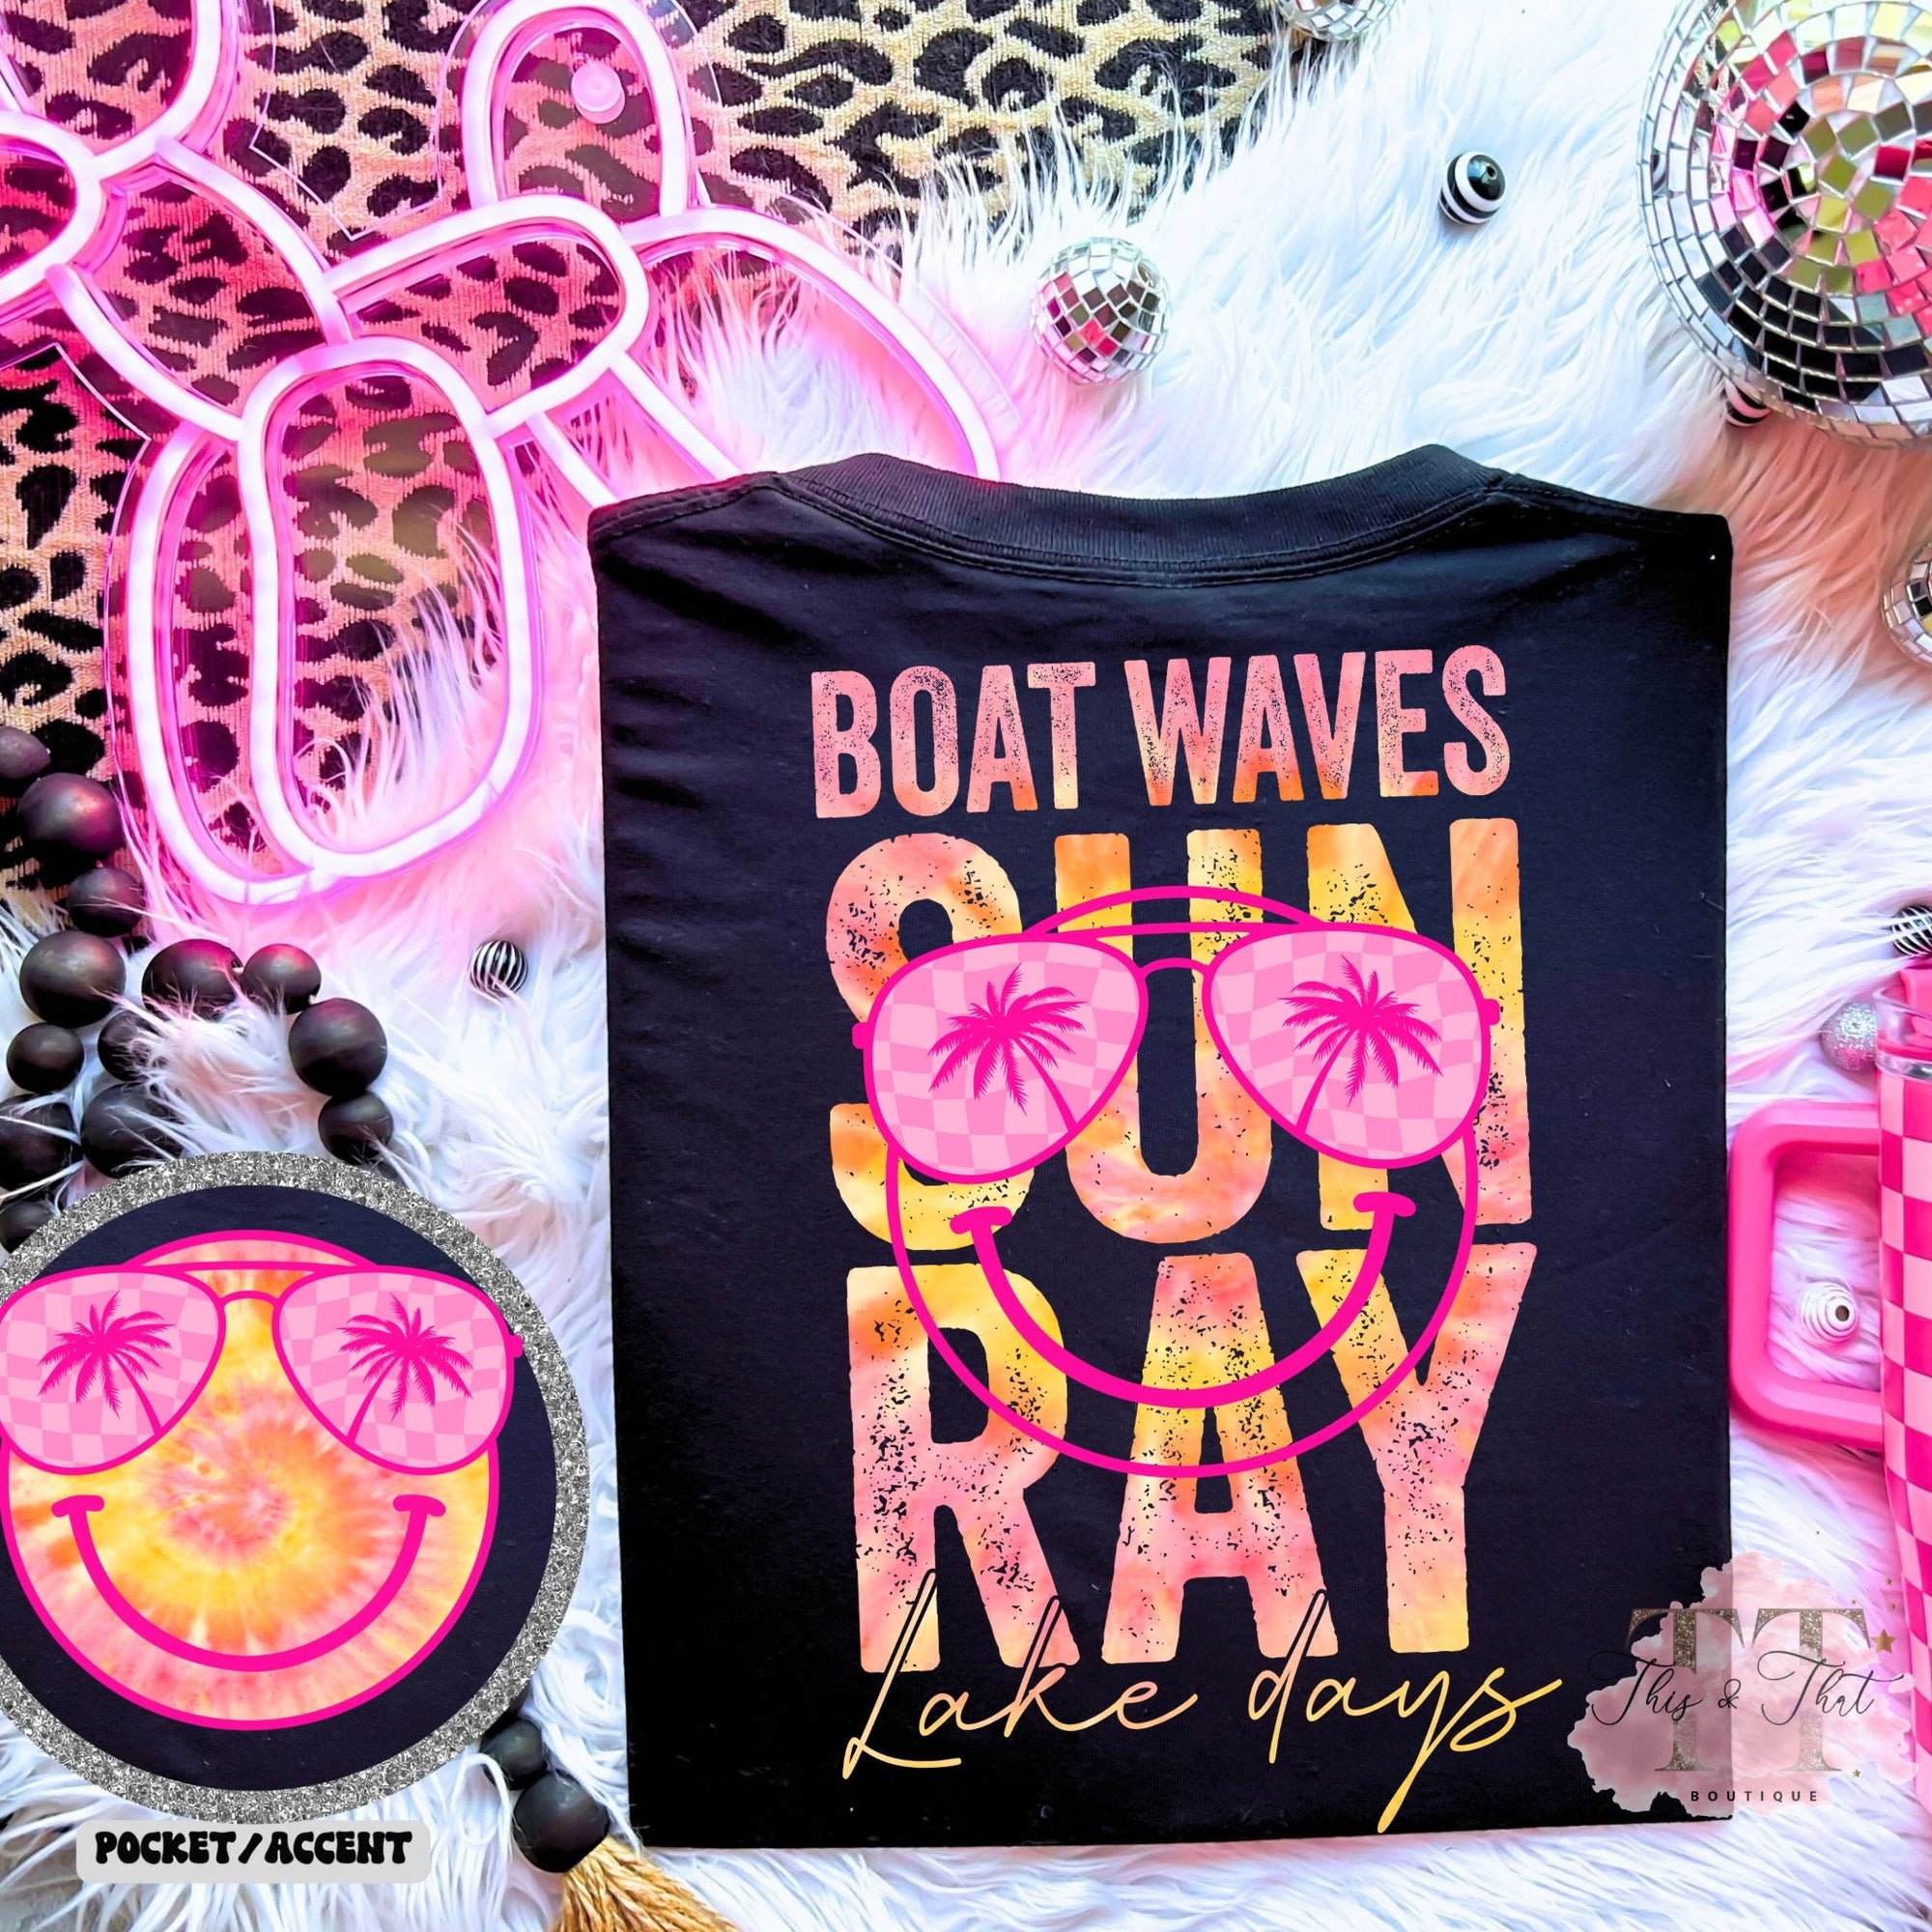 Boat Waves Sun Ray Lake Days on a Black Tee